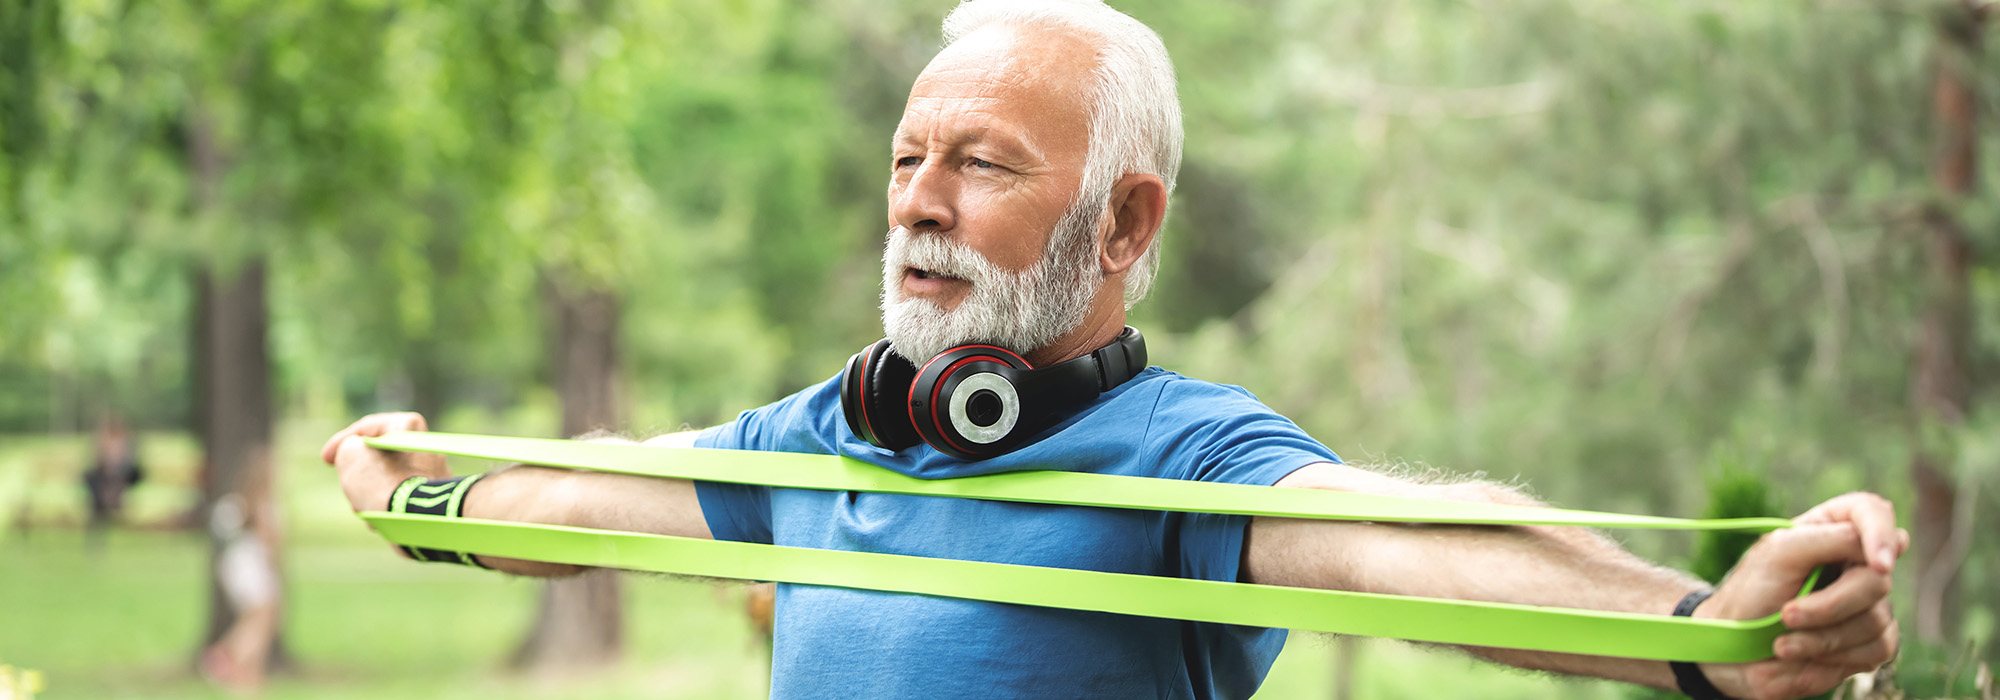 Why Everyone Over 50 Should Do Resistance Training